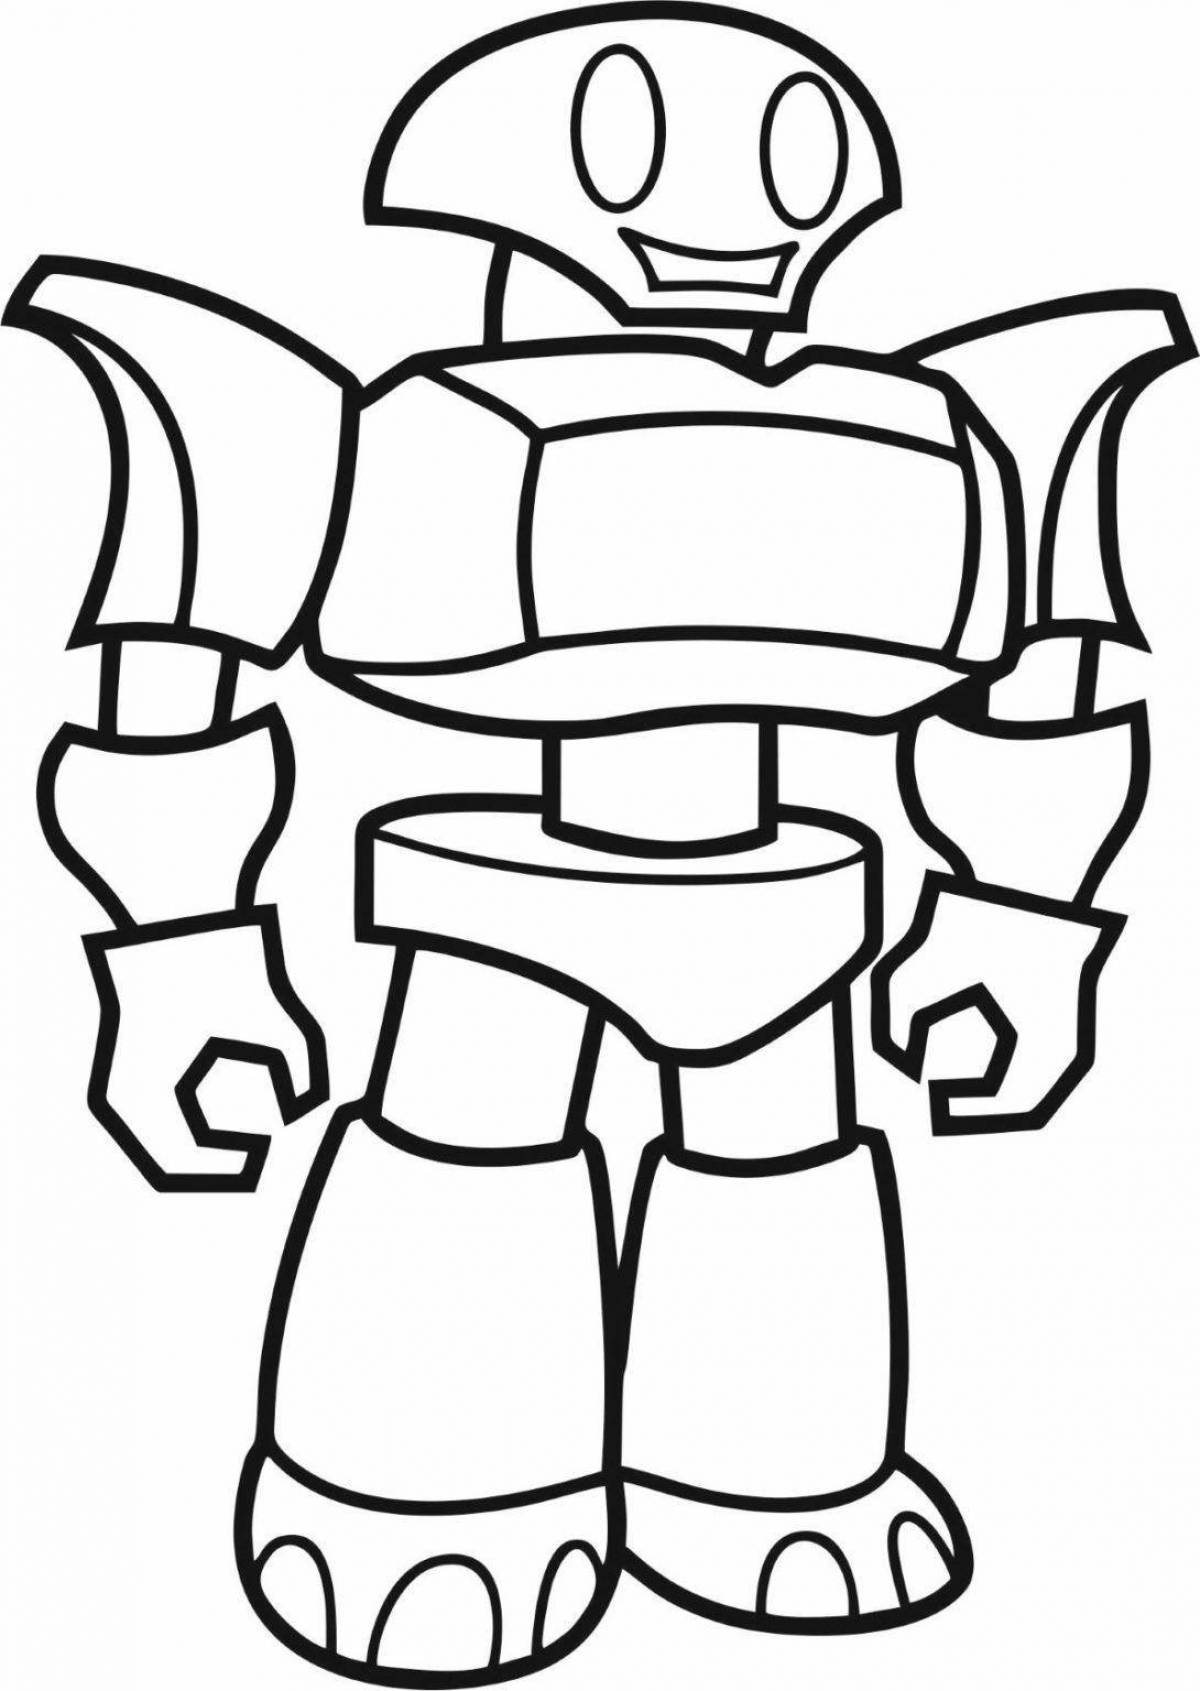 Innovative robot coloring page for 5 year olds